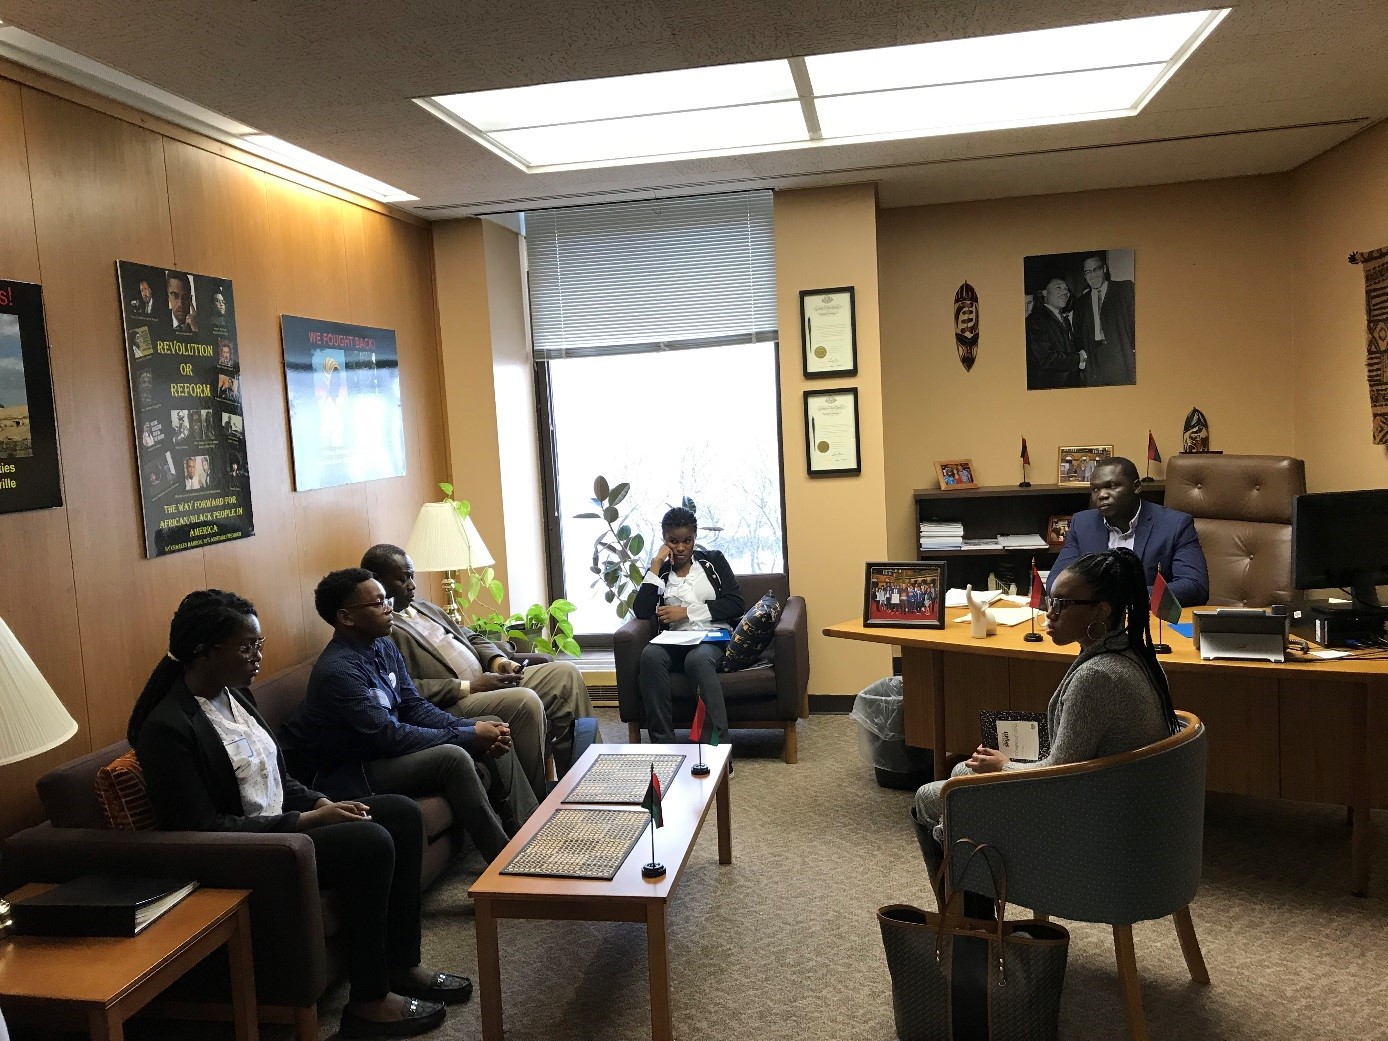 Students from Clara Barton High School for Health Professionals met with a staff member from Assemblyman Charles Barron’s office to support efforts around AP credit.